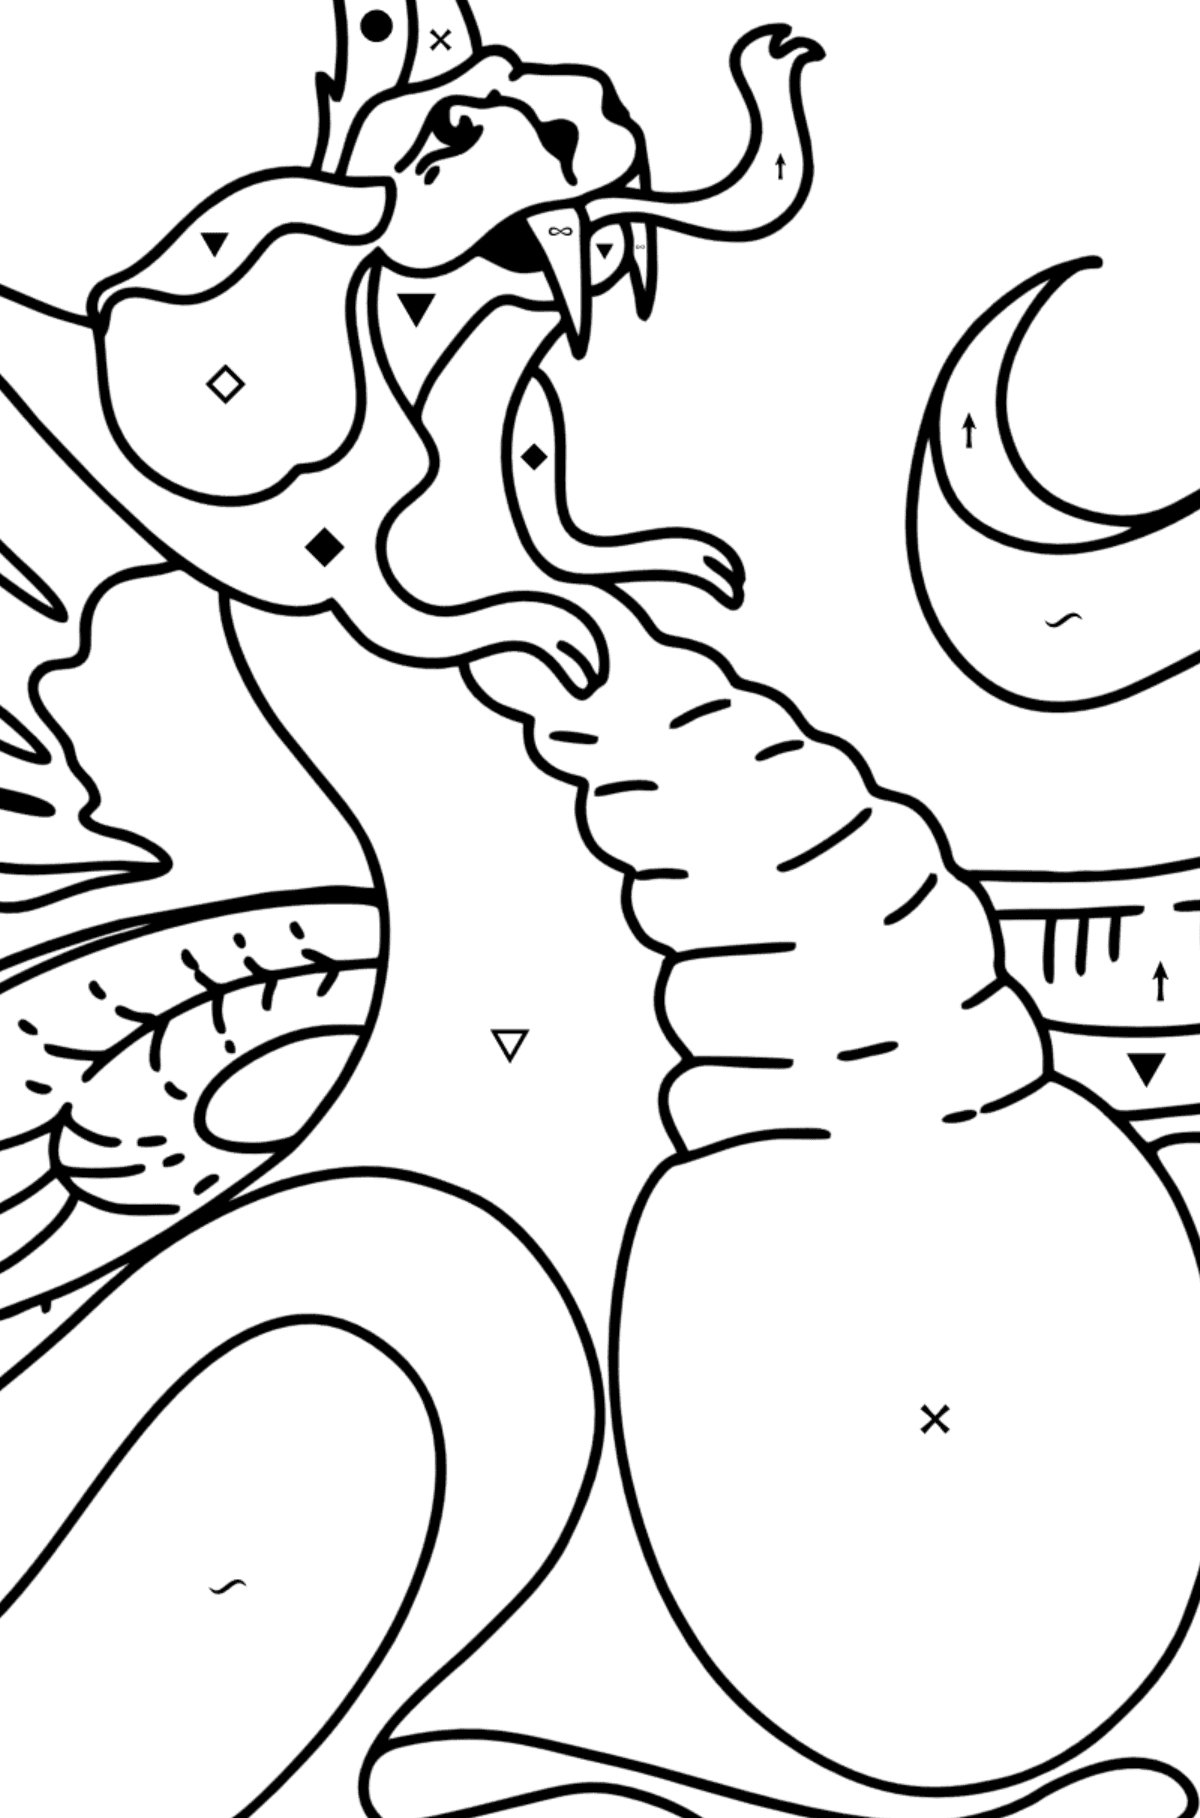 Tired Dragon coloring page - Coloring by Symbols for Kids